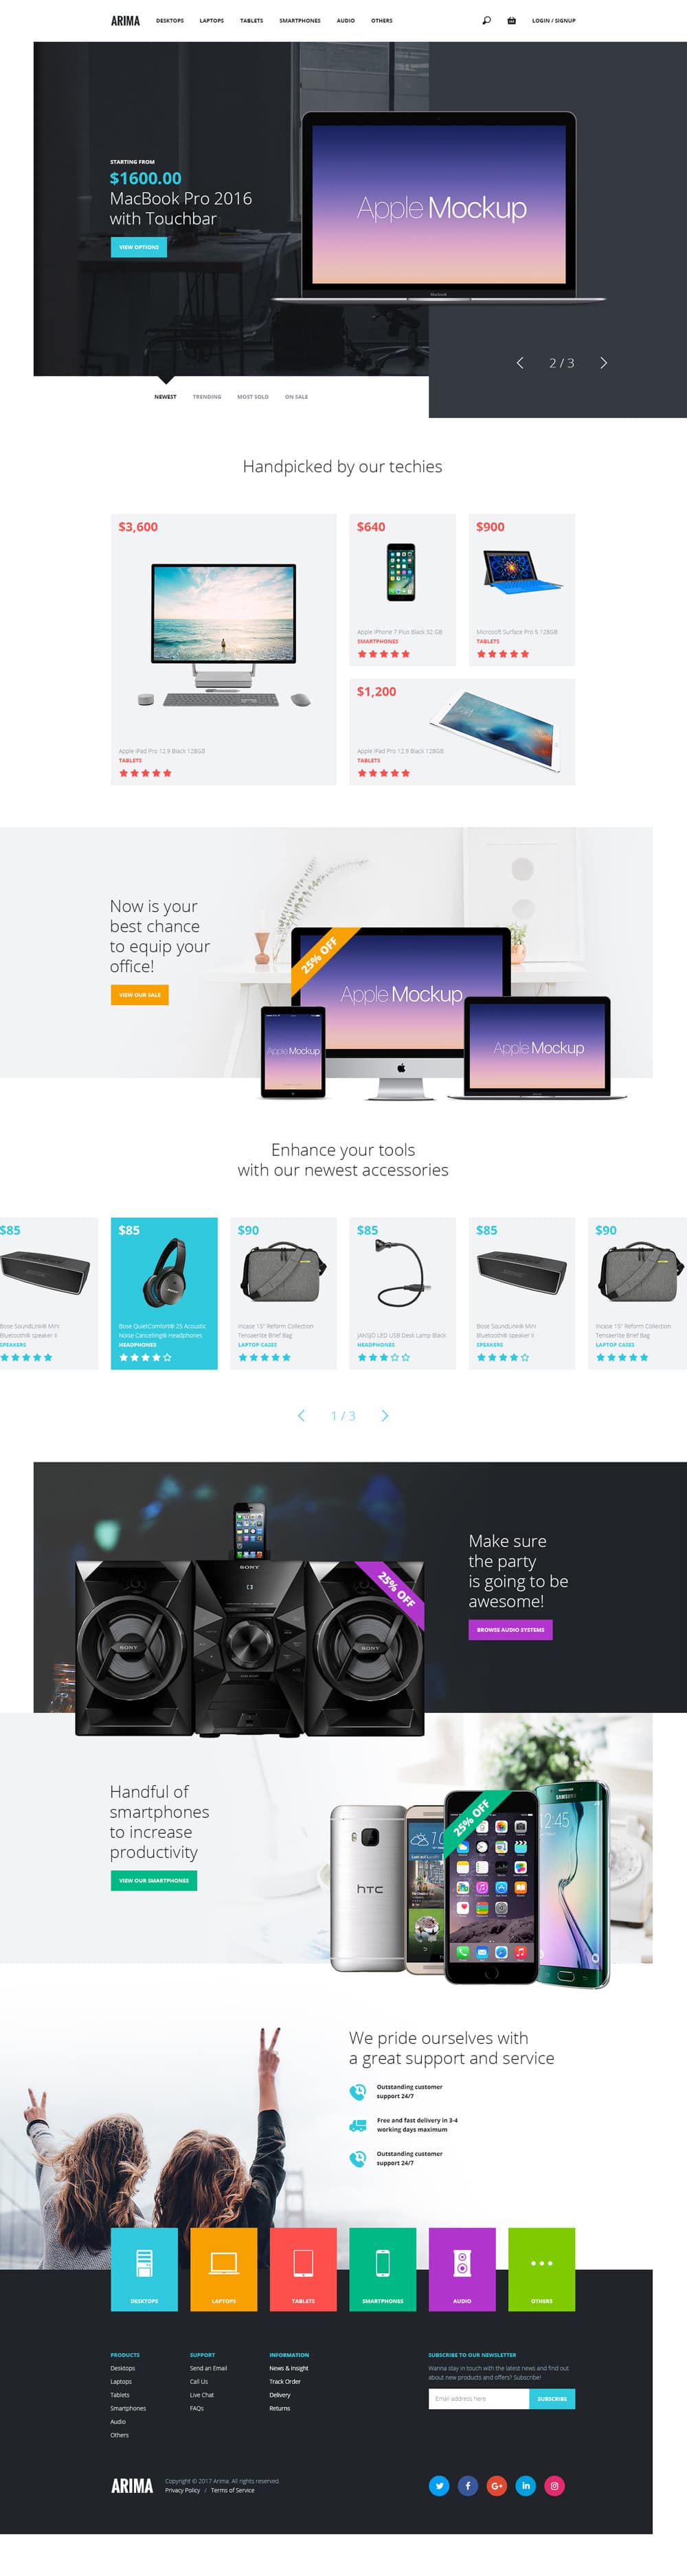 Free Ecommerce Landing Page